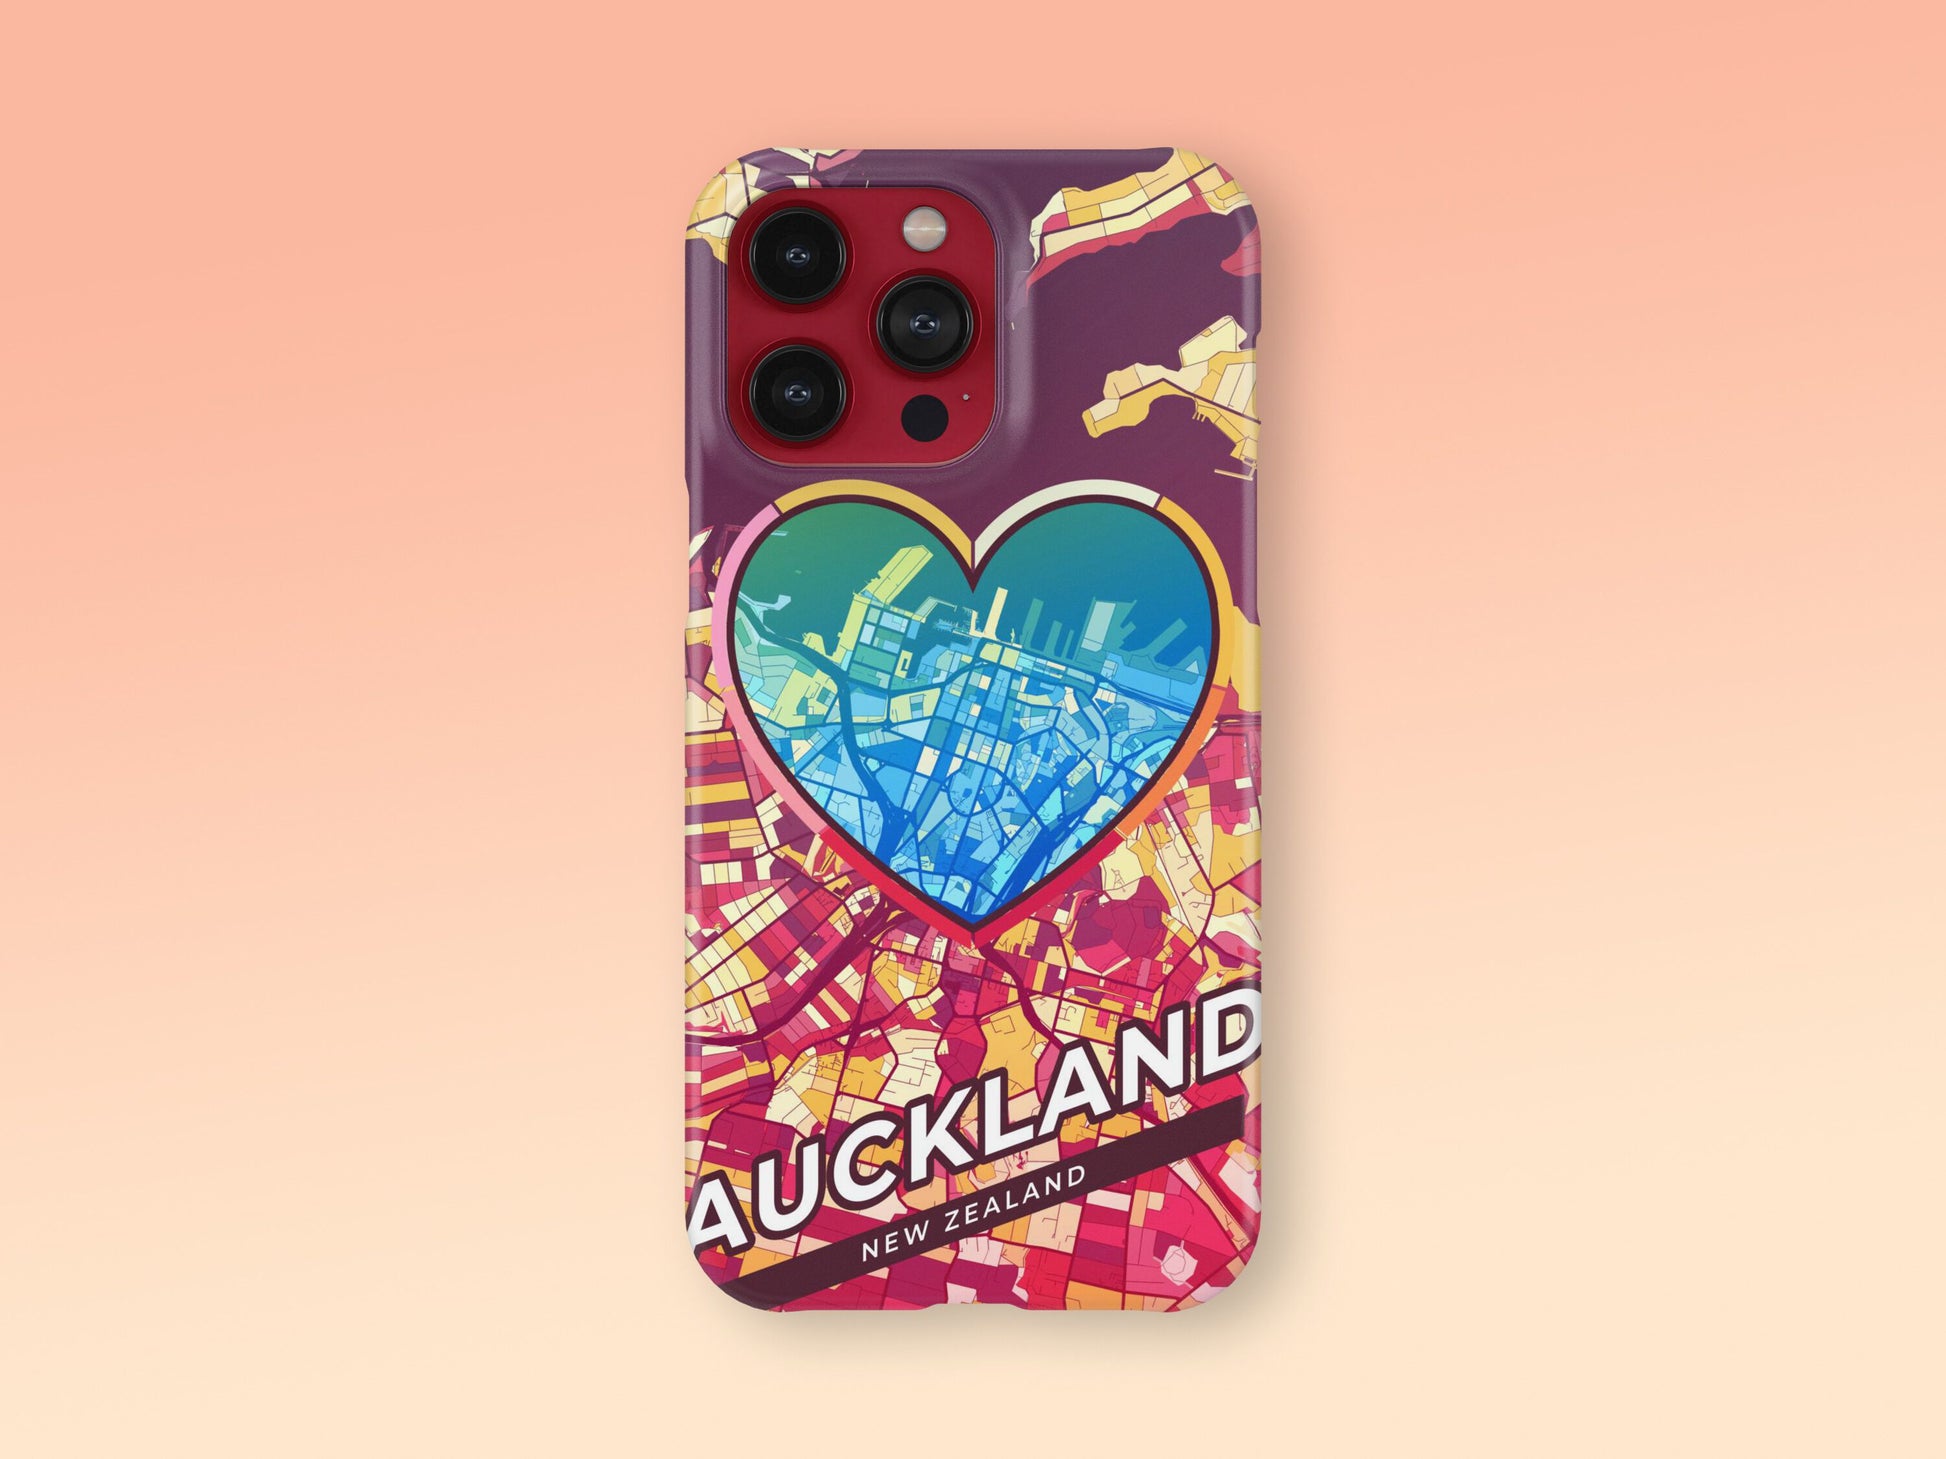 Auckland New Zealand slim phone case with colorful icon. Birthday, wedding or housewarming gift. Couple match cases. 2